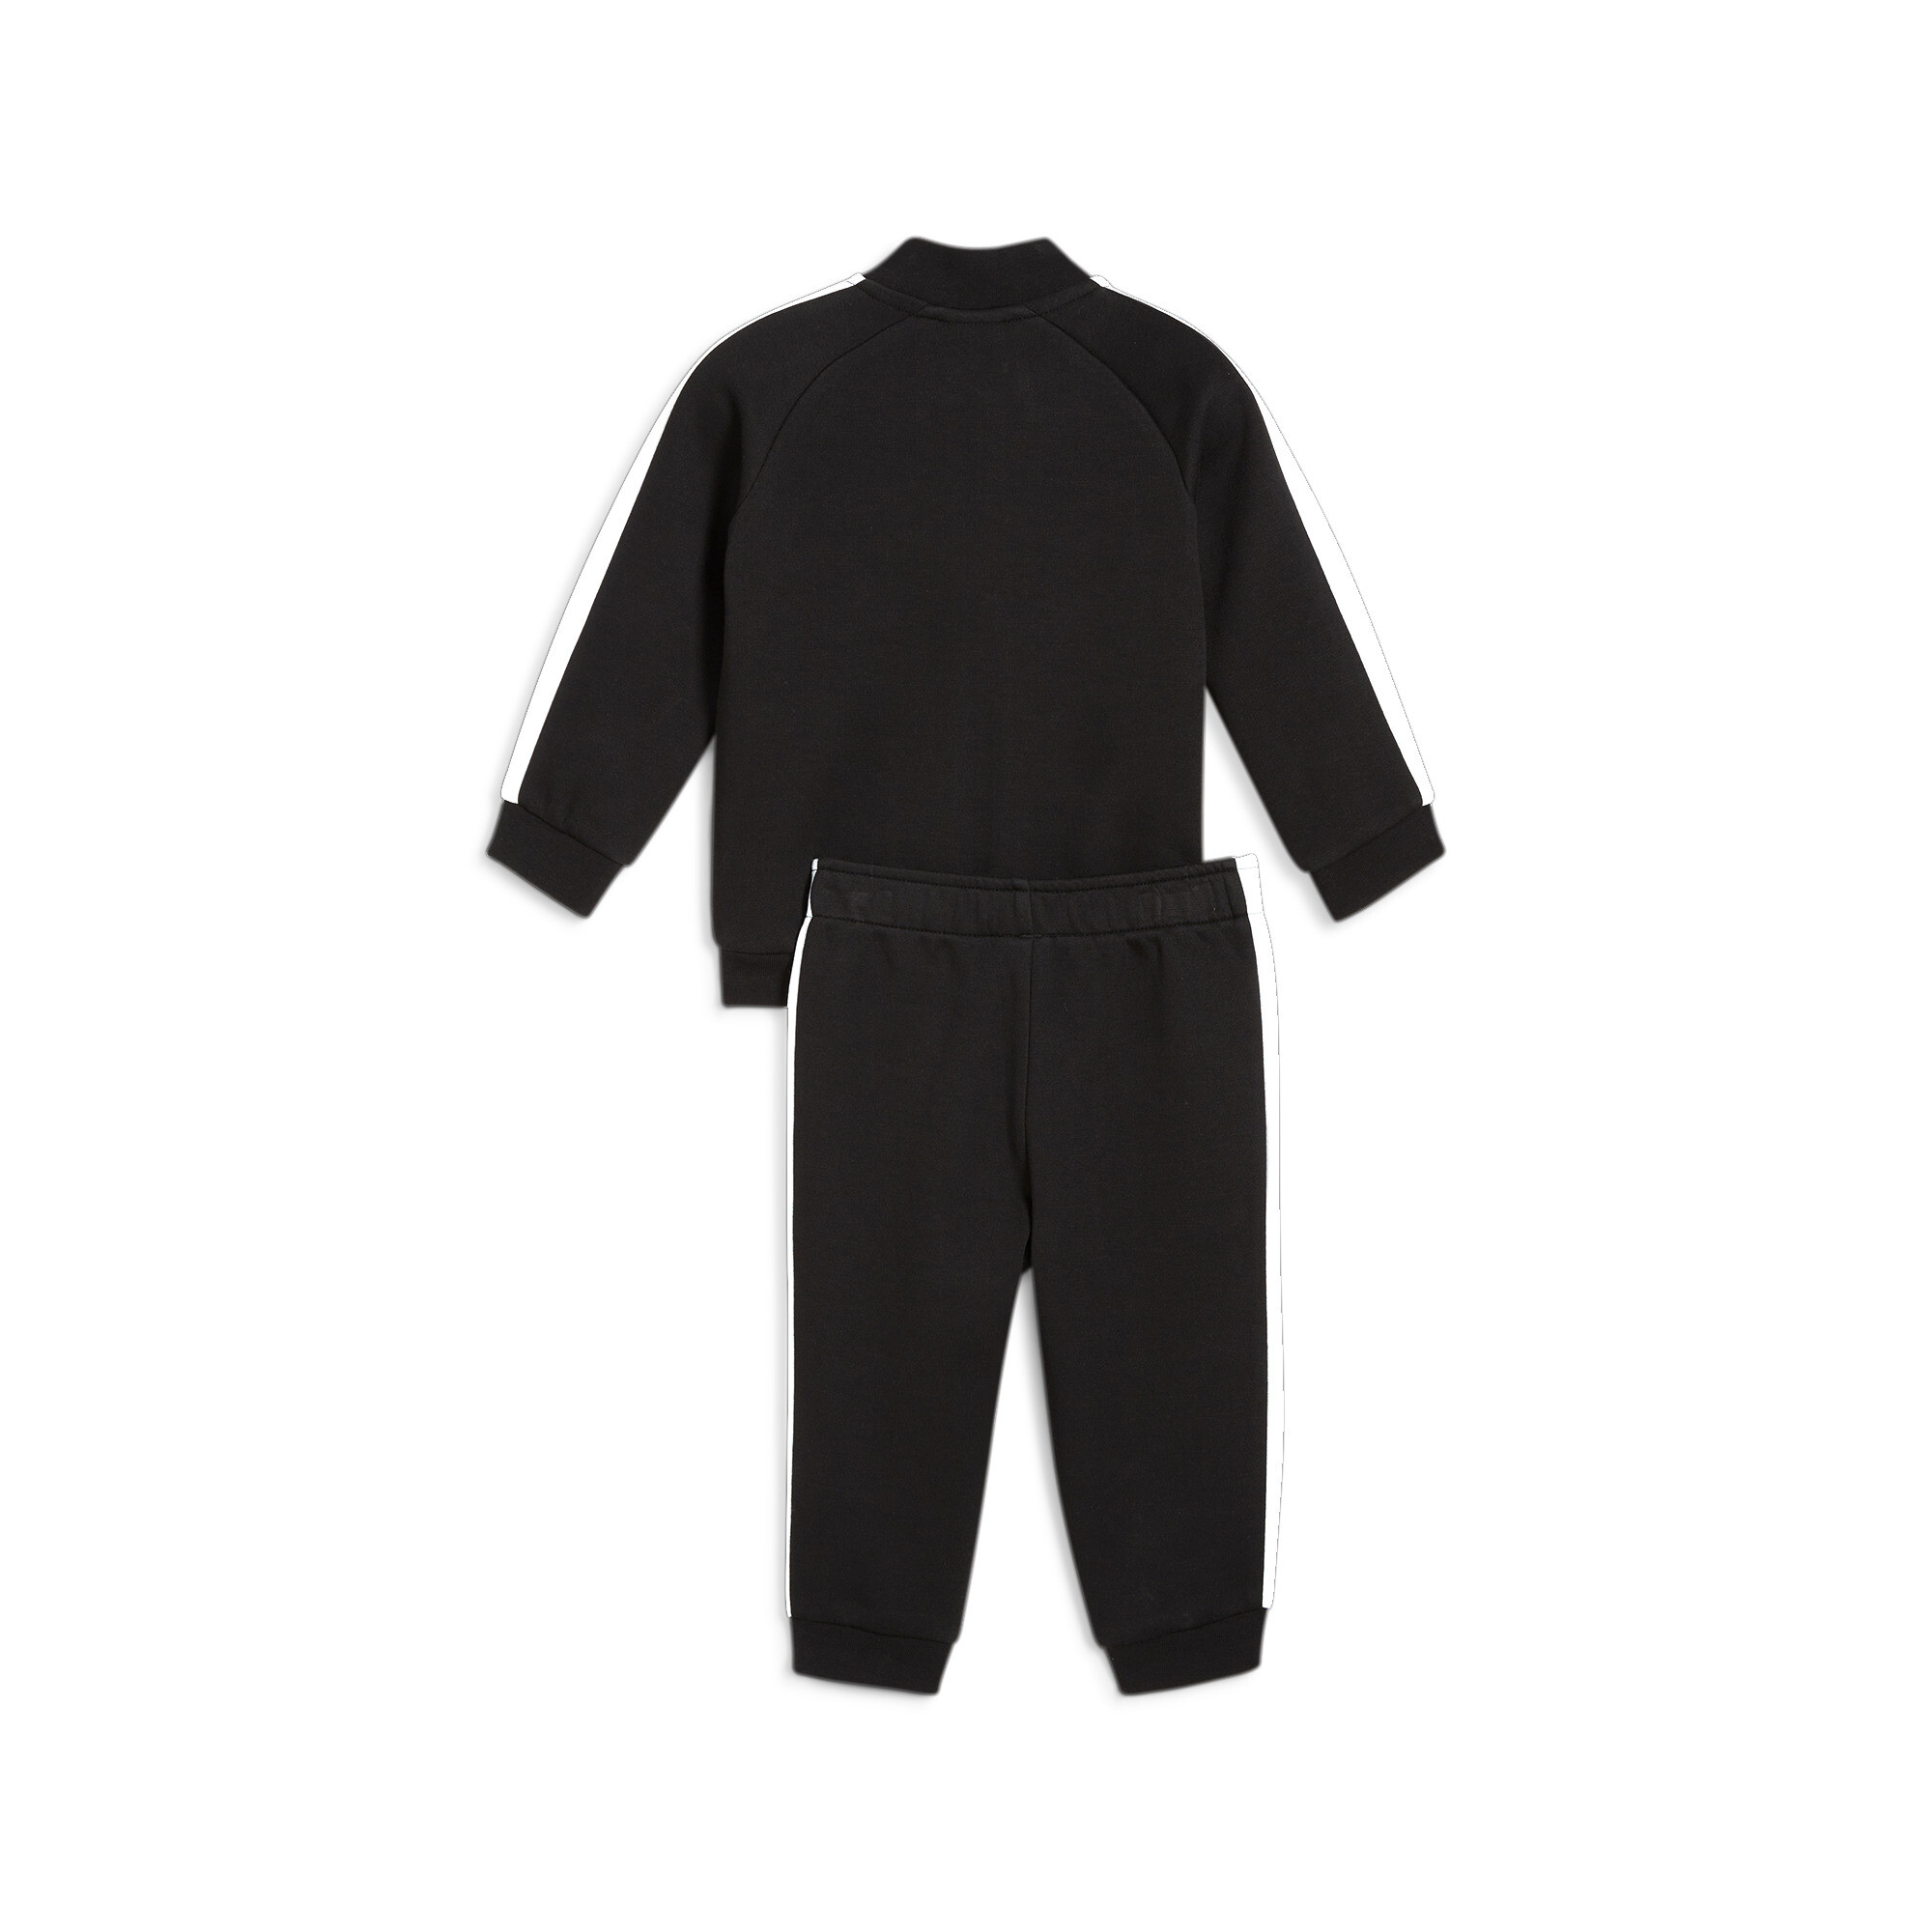 Kids' PUMA MINICATS T7 ICONIC Baby Tracksuit Set In Black, Size 9-12 Months